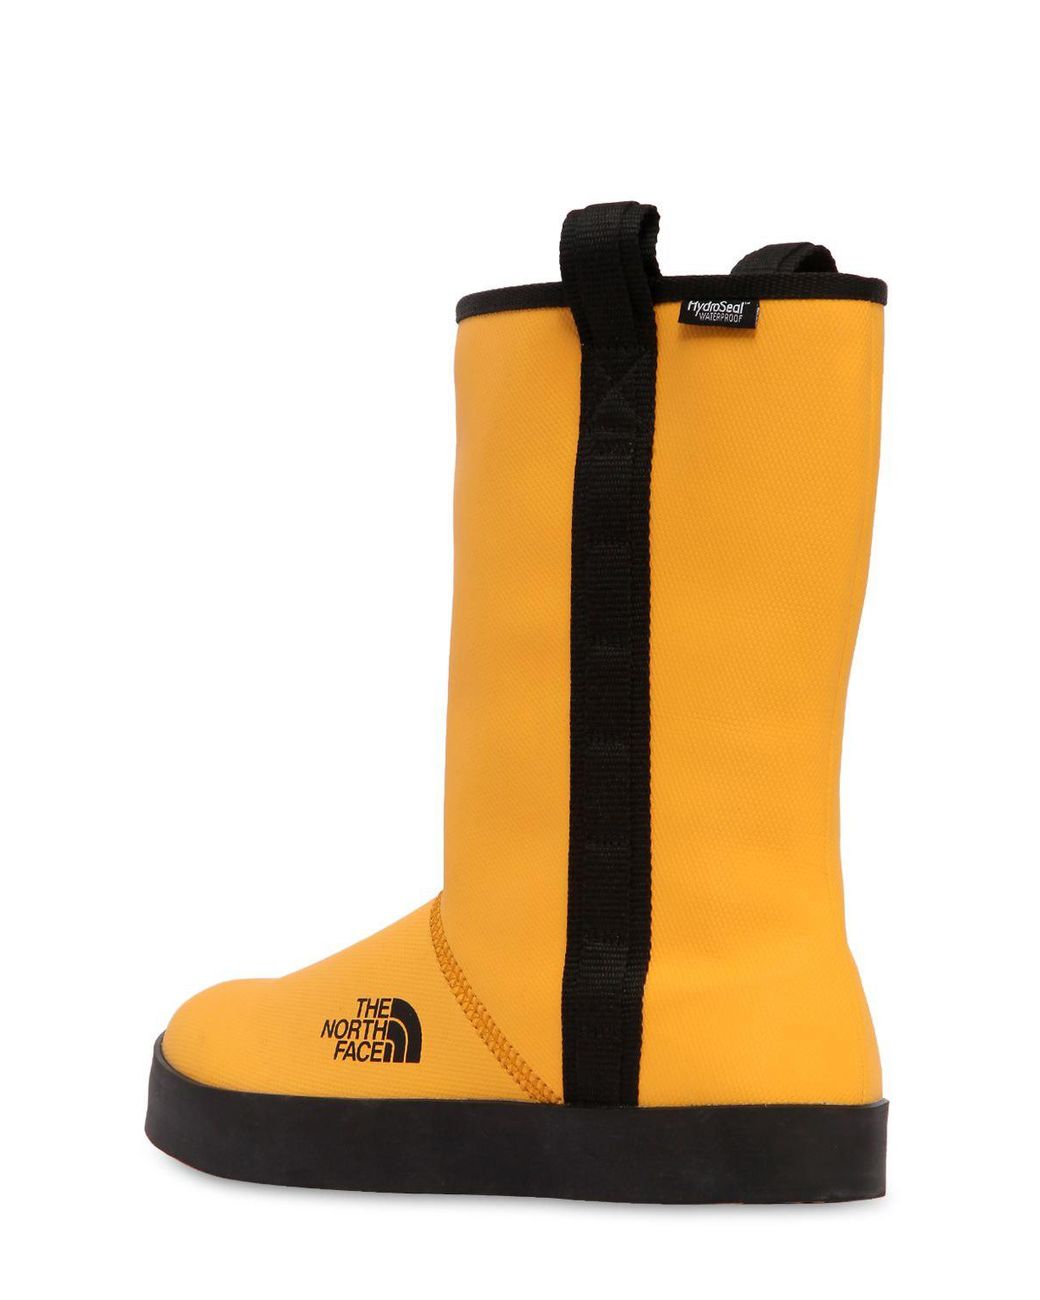 The North Face Base Camp Waterproof Short Rain Boots in Yellow